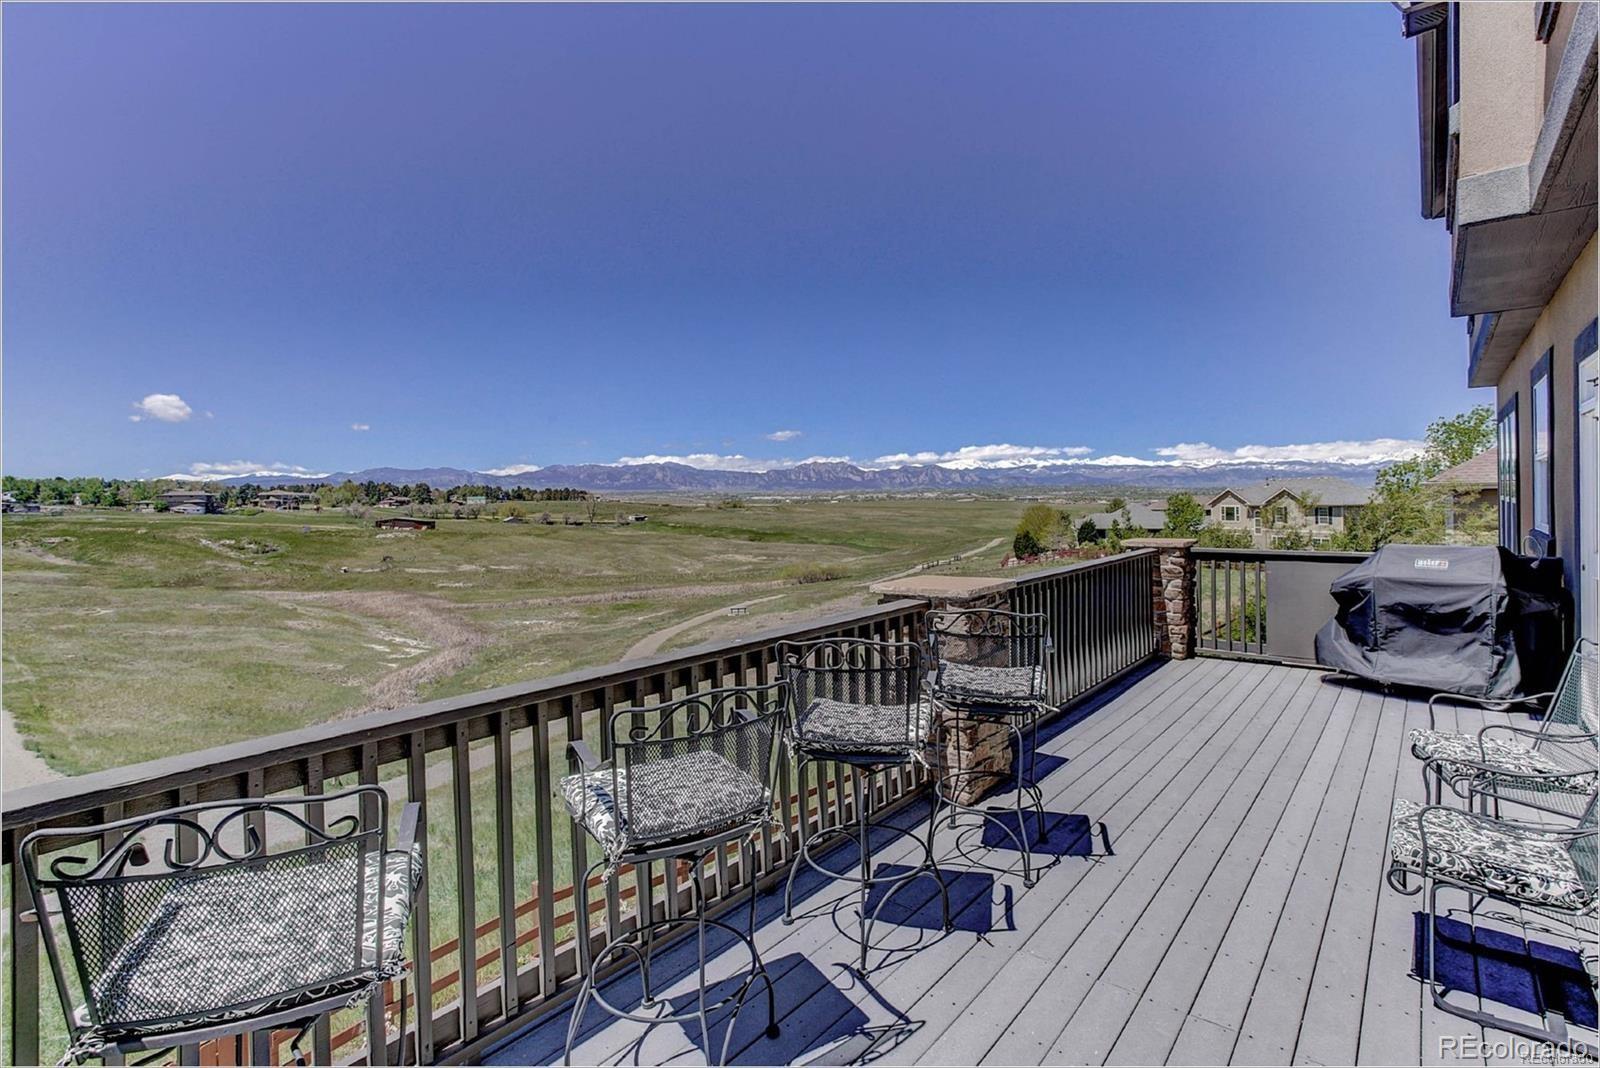 5004 Silver Feather, Broomfield, CO